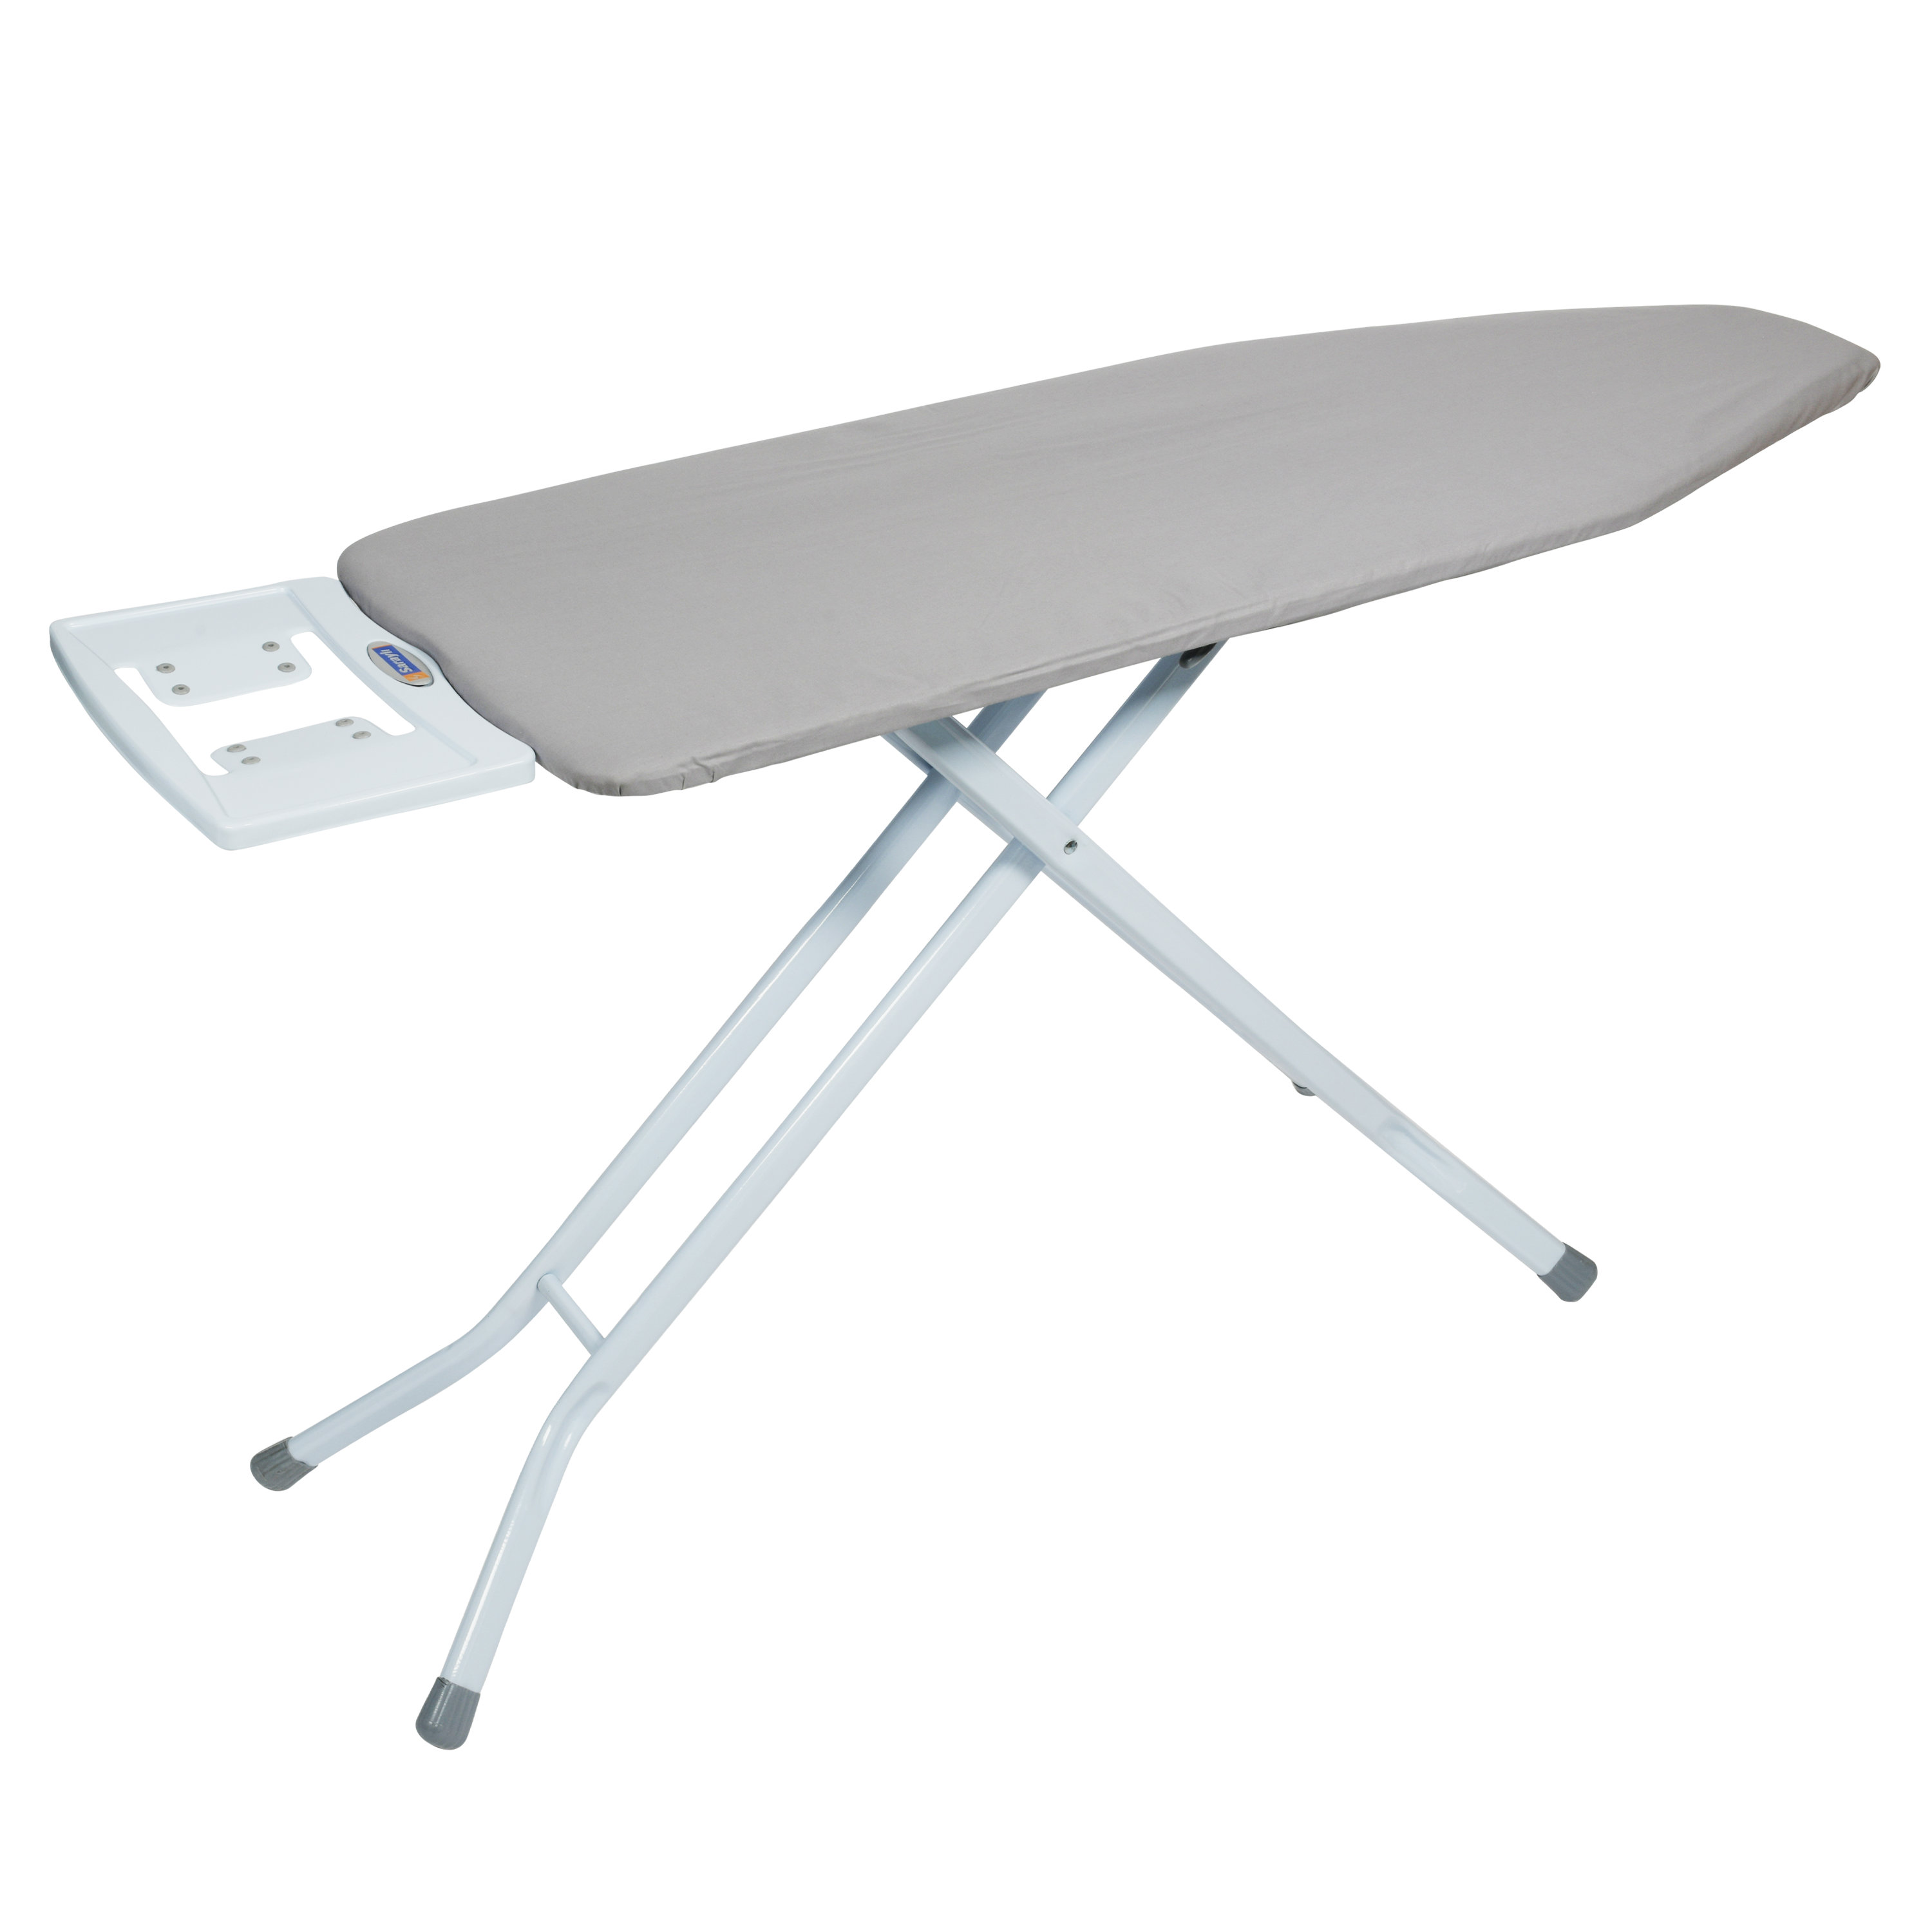 Whitmor 29 in. x 12 in. Metal Mesh Tabletop Ironing Board with